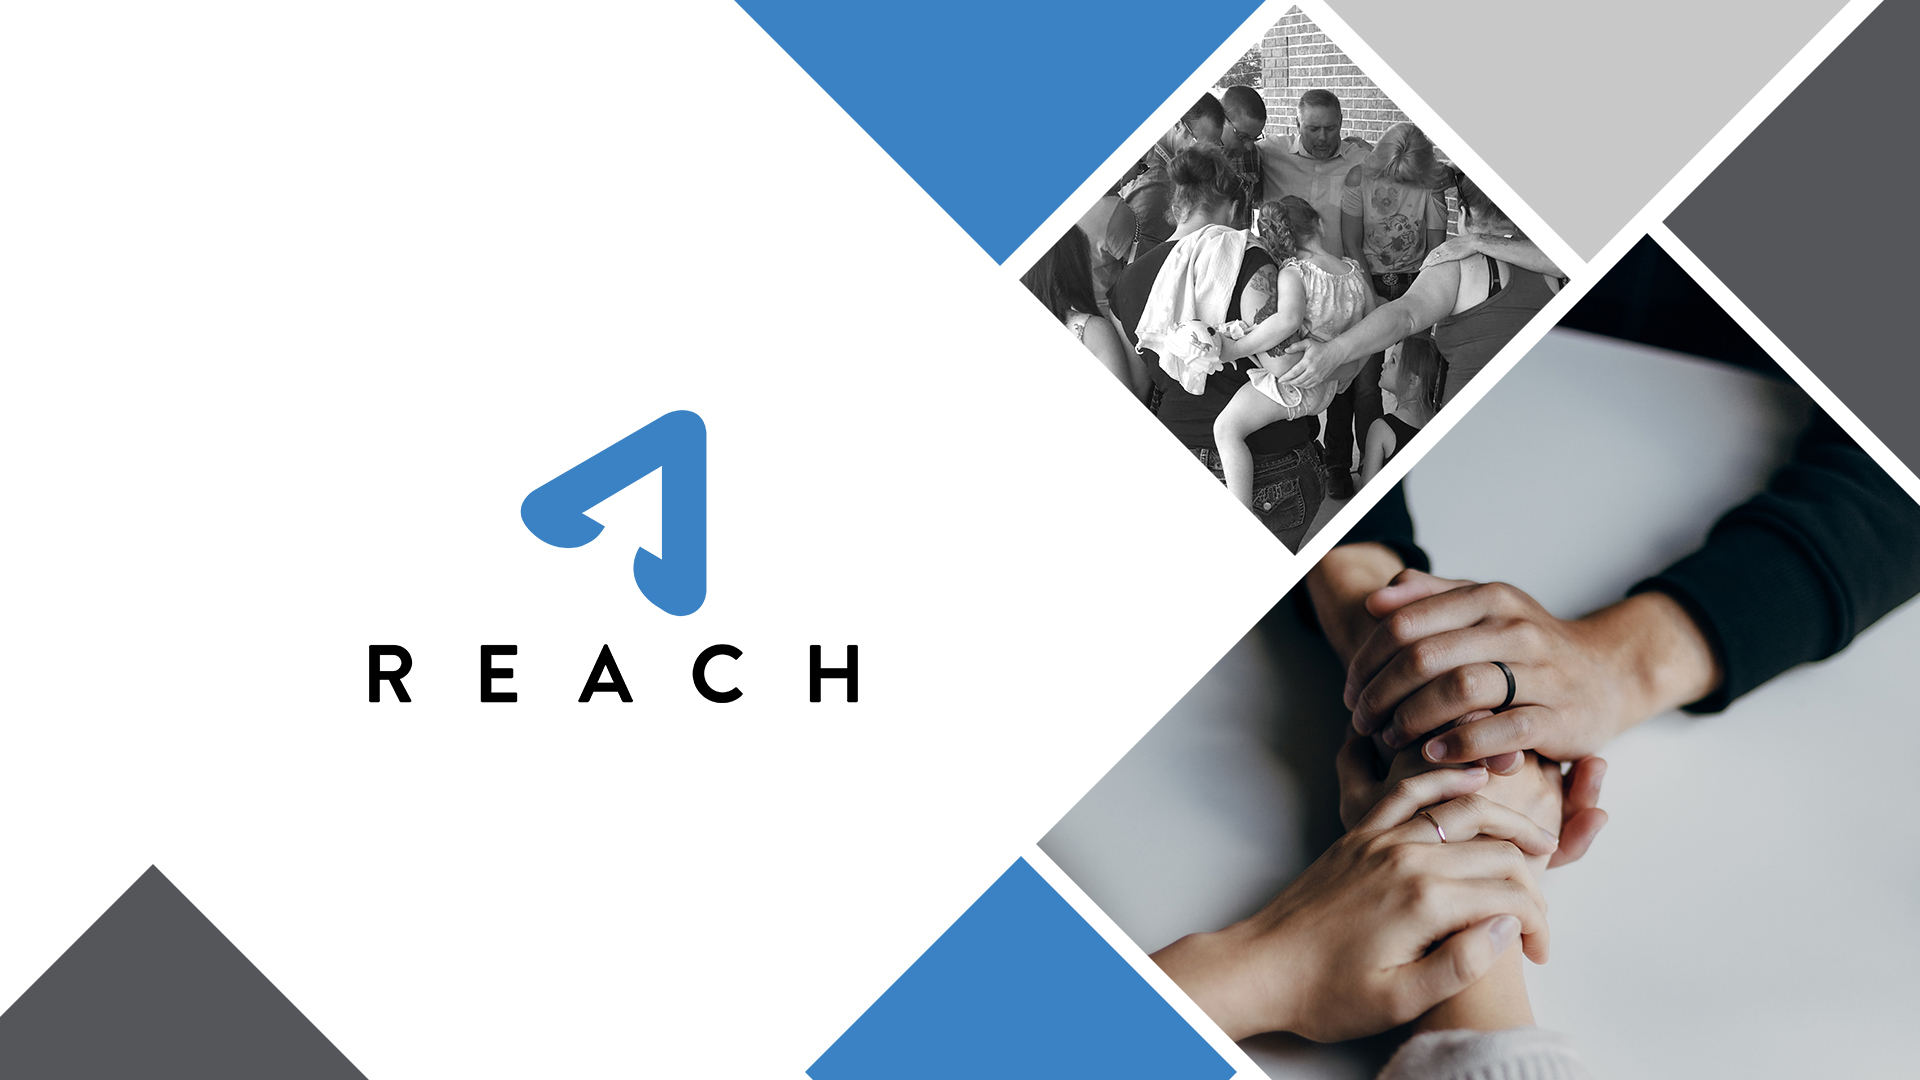 REACH MINISTRY

REACH Ministry Teams encompass and support every area of outreach beyond the doors of Grace.
